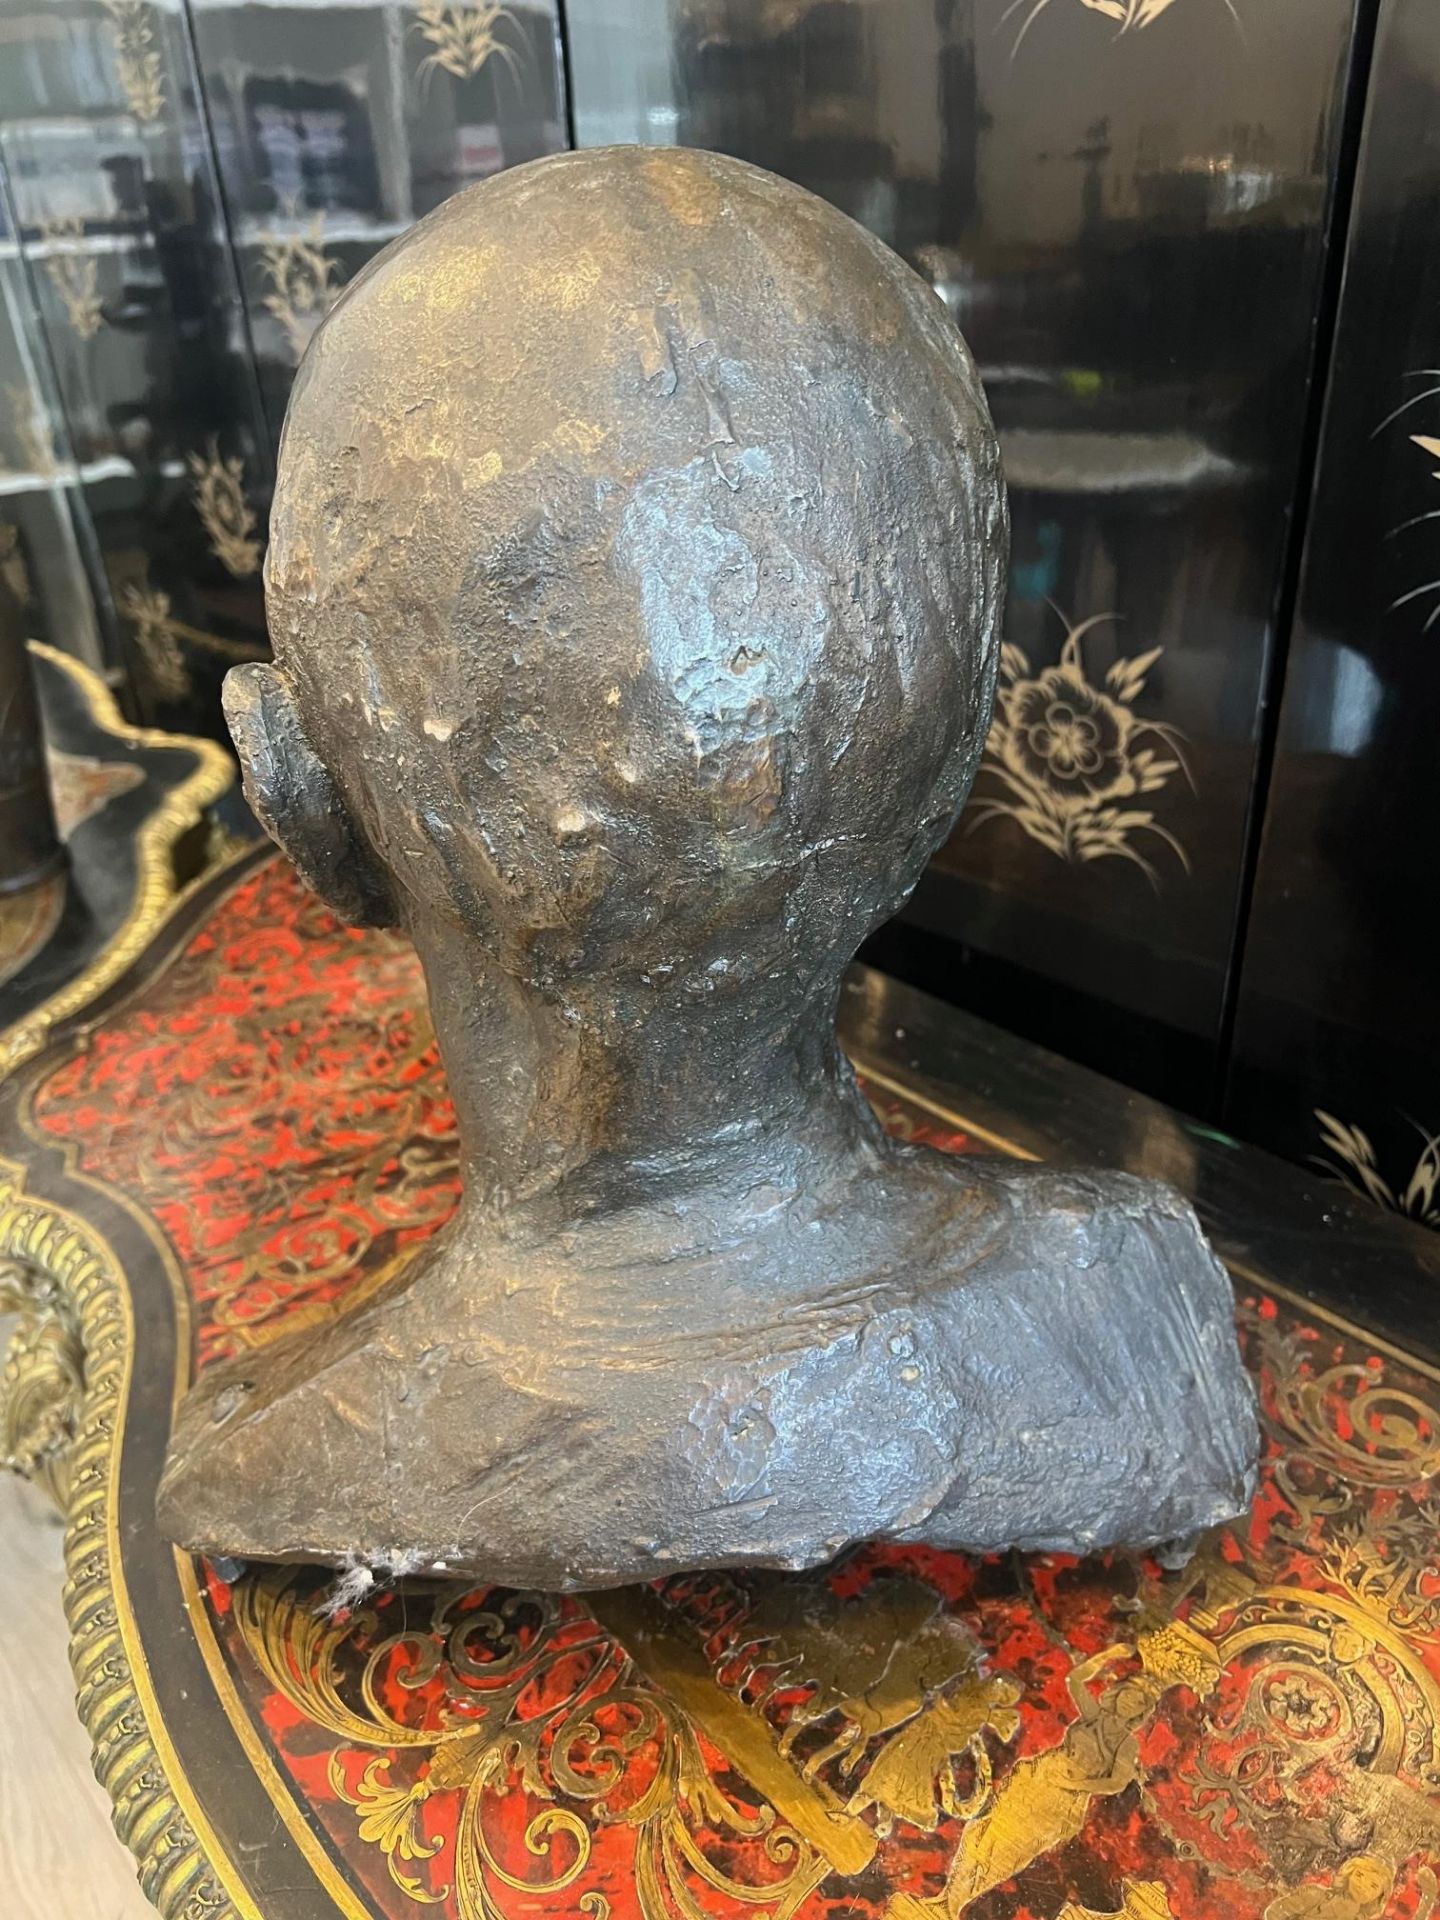 A LARGE 20TH CENTURY BRONZE PORTRAIT BUST OF A MAN - Image 3 of 6